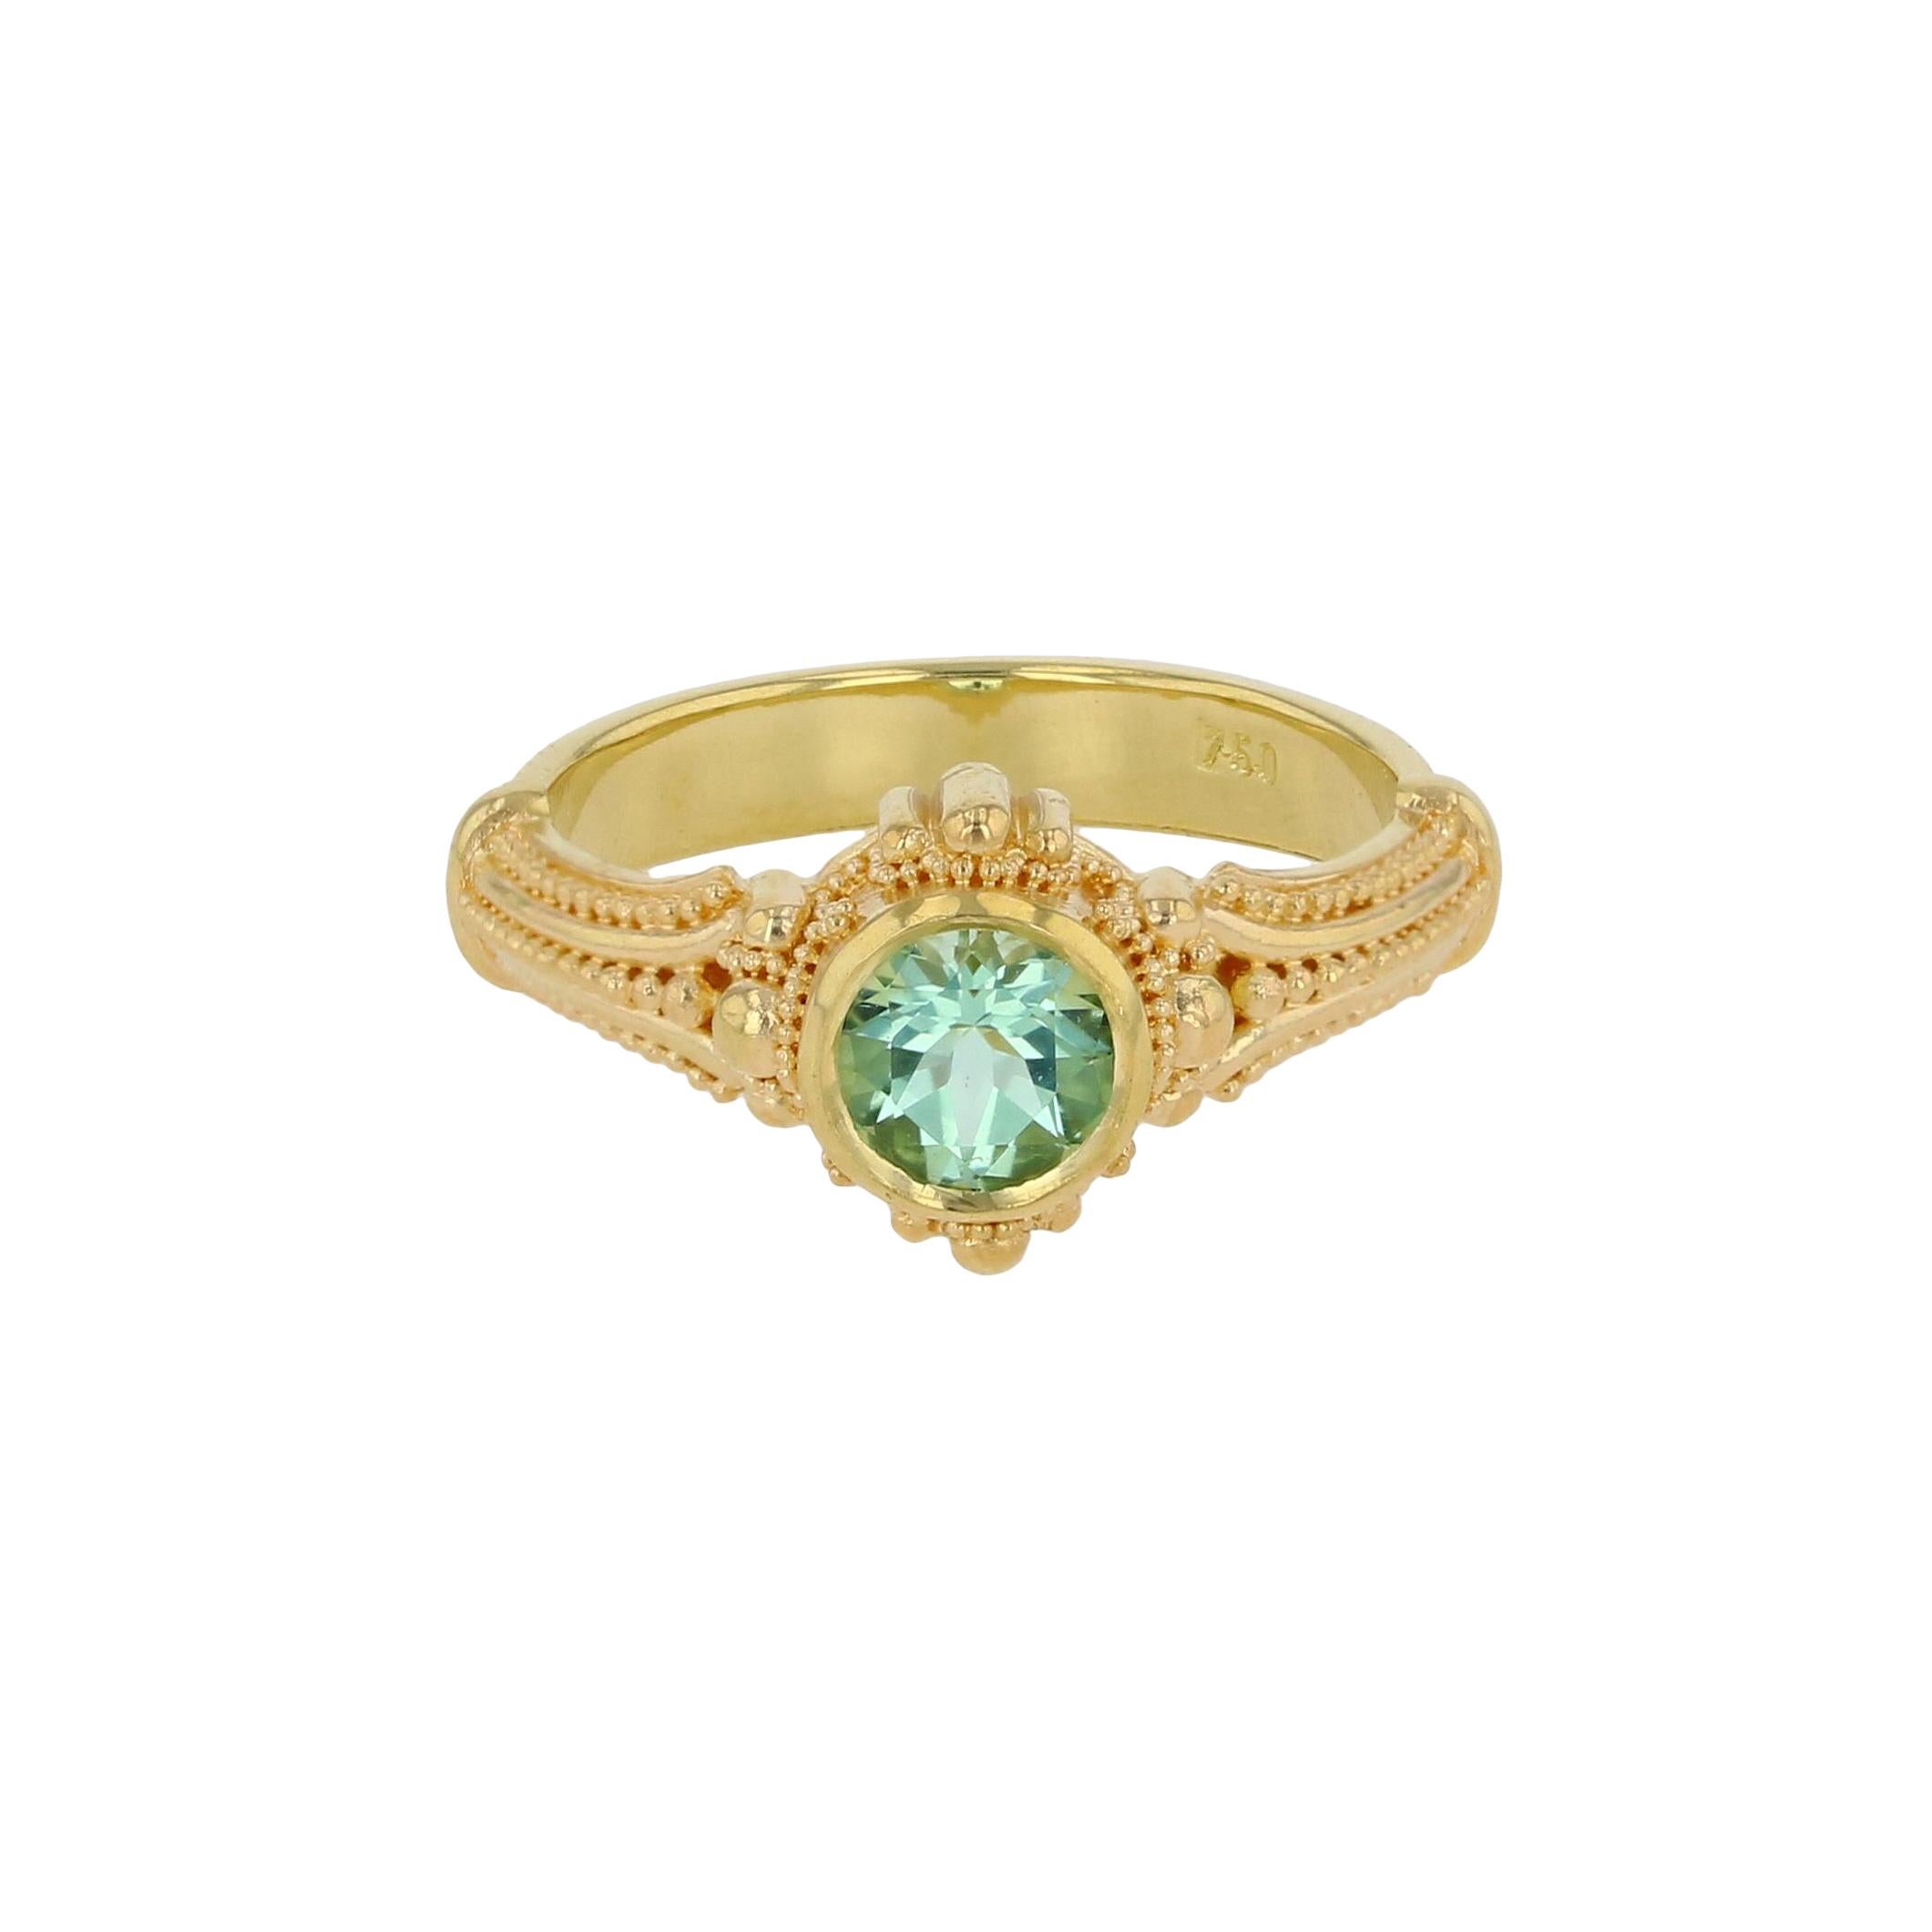 Women's or Men's Kent Raible 18 Karat Gold Solitare Ring with Seafoam Tourmaline and Granulation For Sale